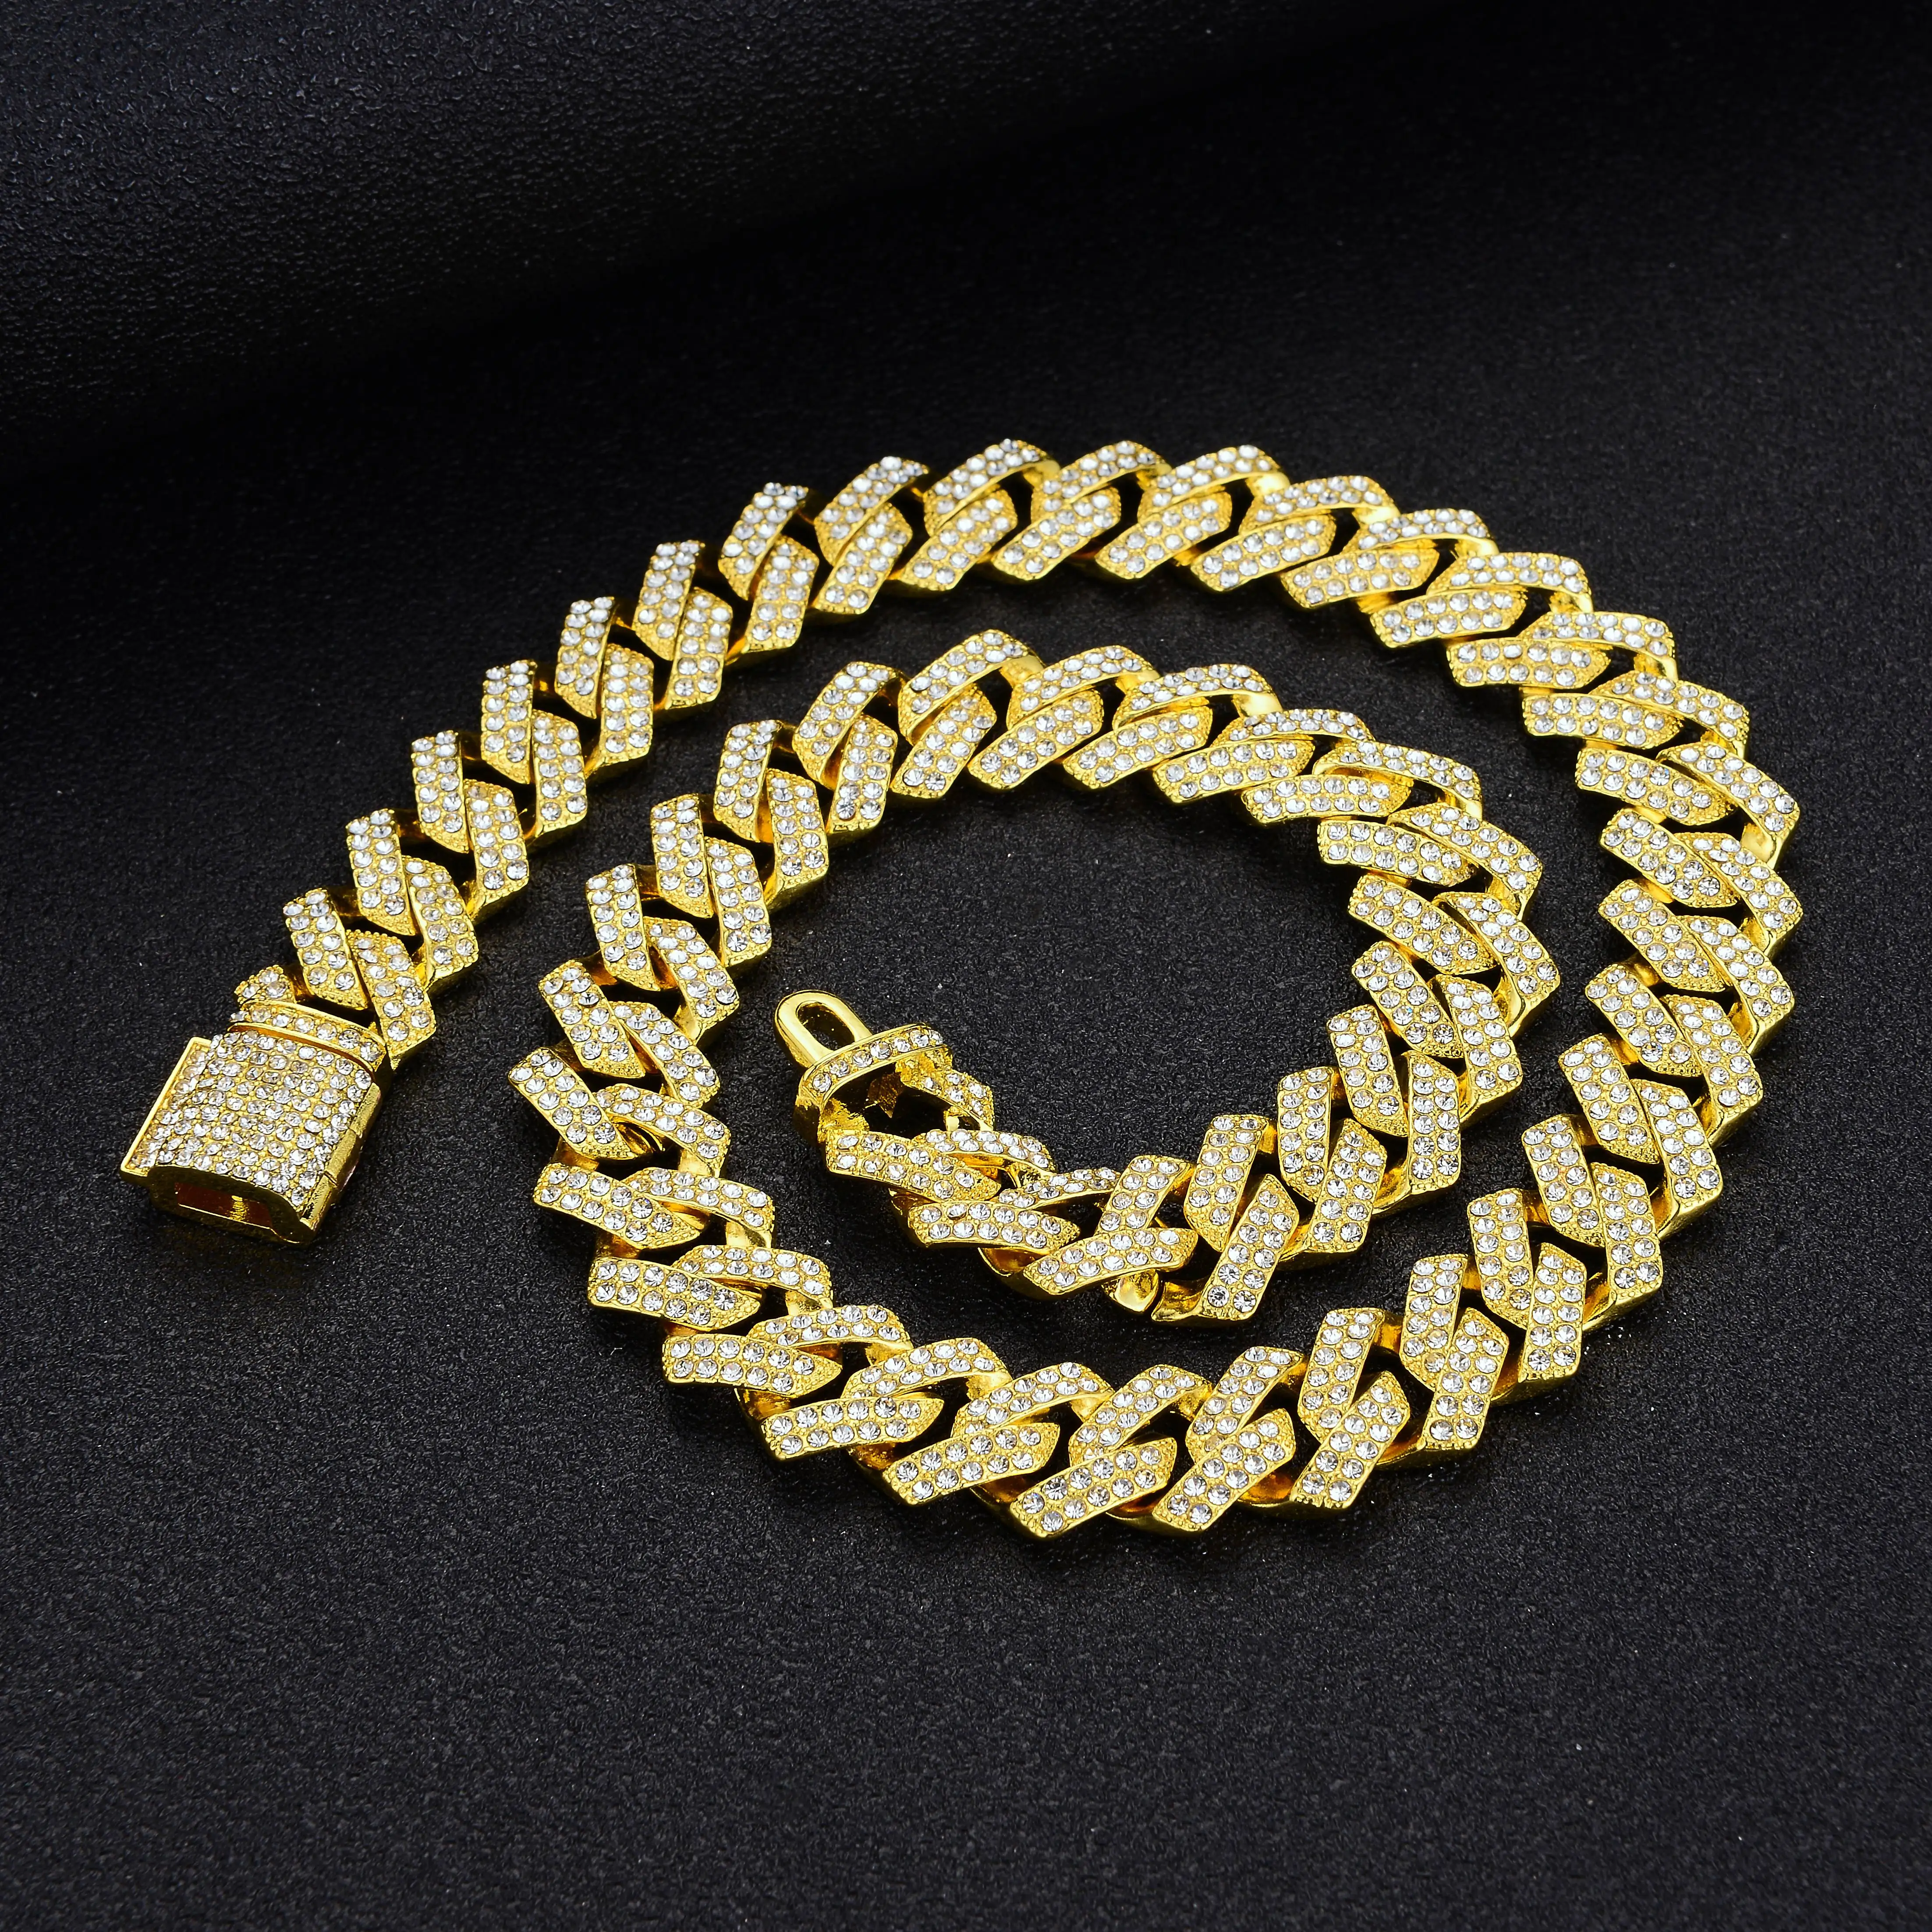 

New Coming Hip Hop Necklace 24K 15 mm Gold Finish Iced Out Hip Hop CZ Miami Cuban Link Chain Miami Necklace, Gold/silver color